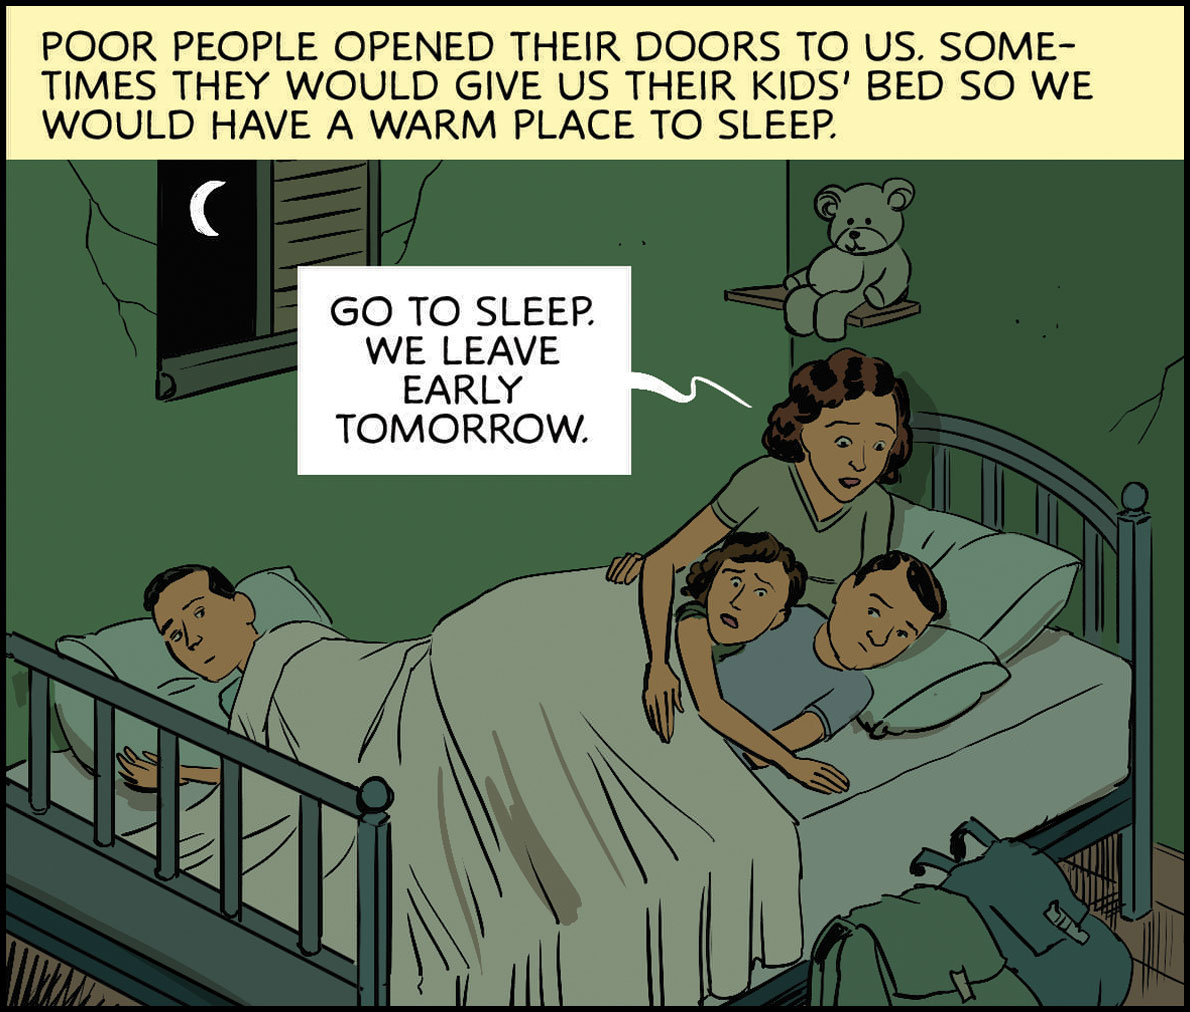 Poor people opened their doors to us. Sometimes they would give us their kids’ bed so we would have a warm place to sleep. Visual: Katherine, mother and brother all huddled on a child’s bed. Quote from mother: “Go to sleep. We have to leave early tomorrow.”